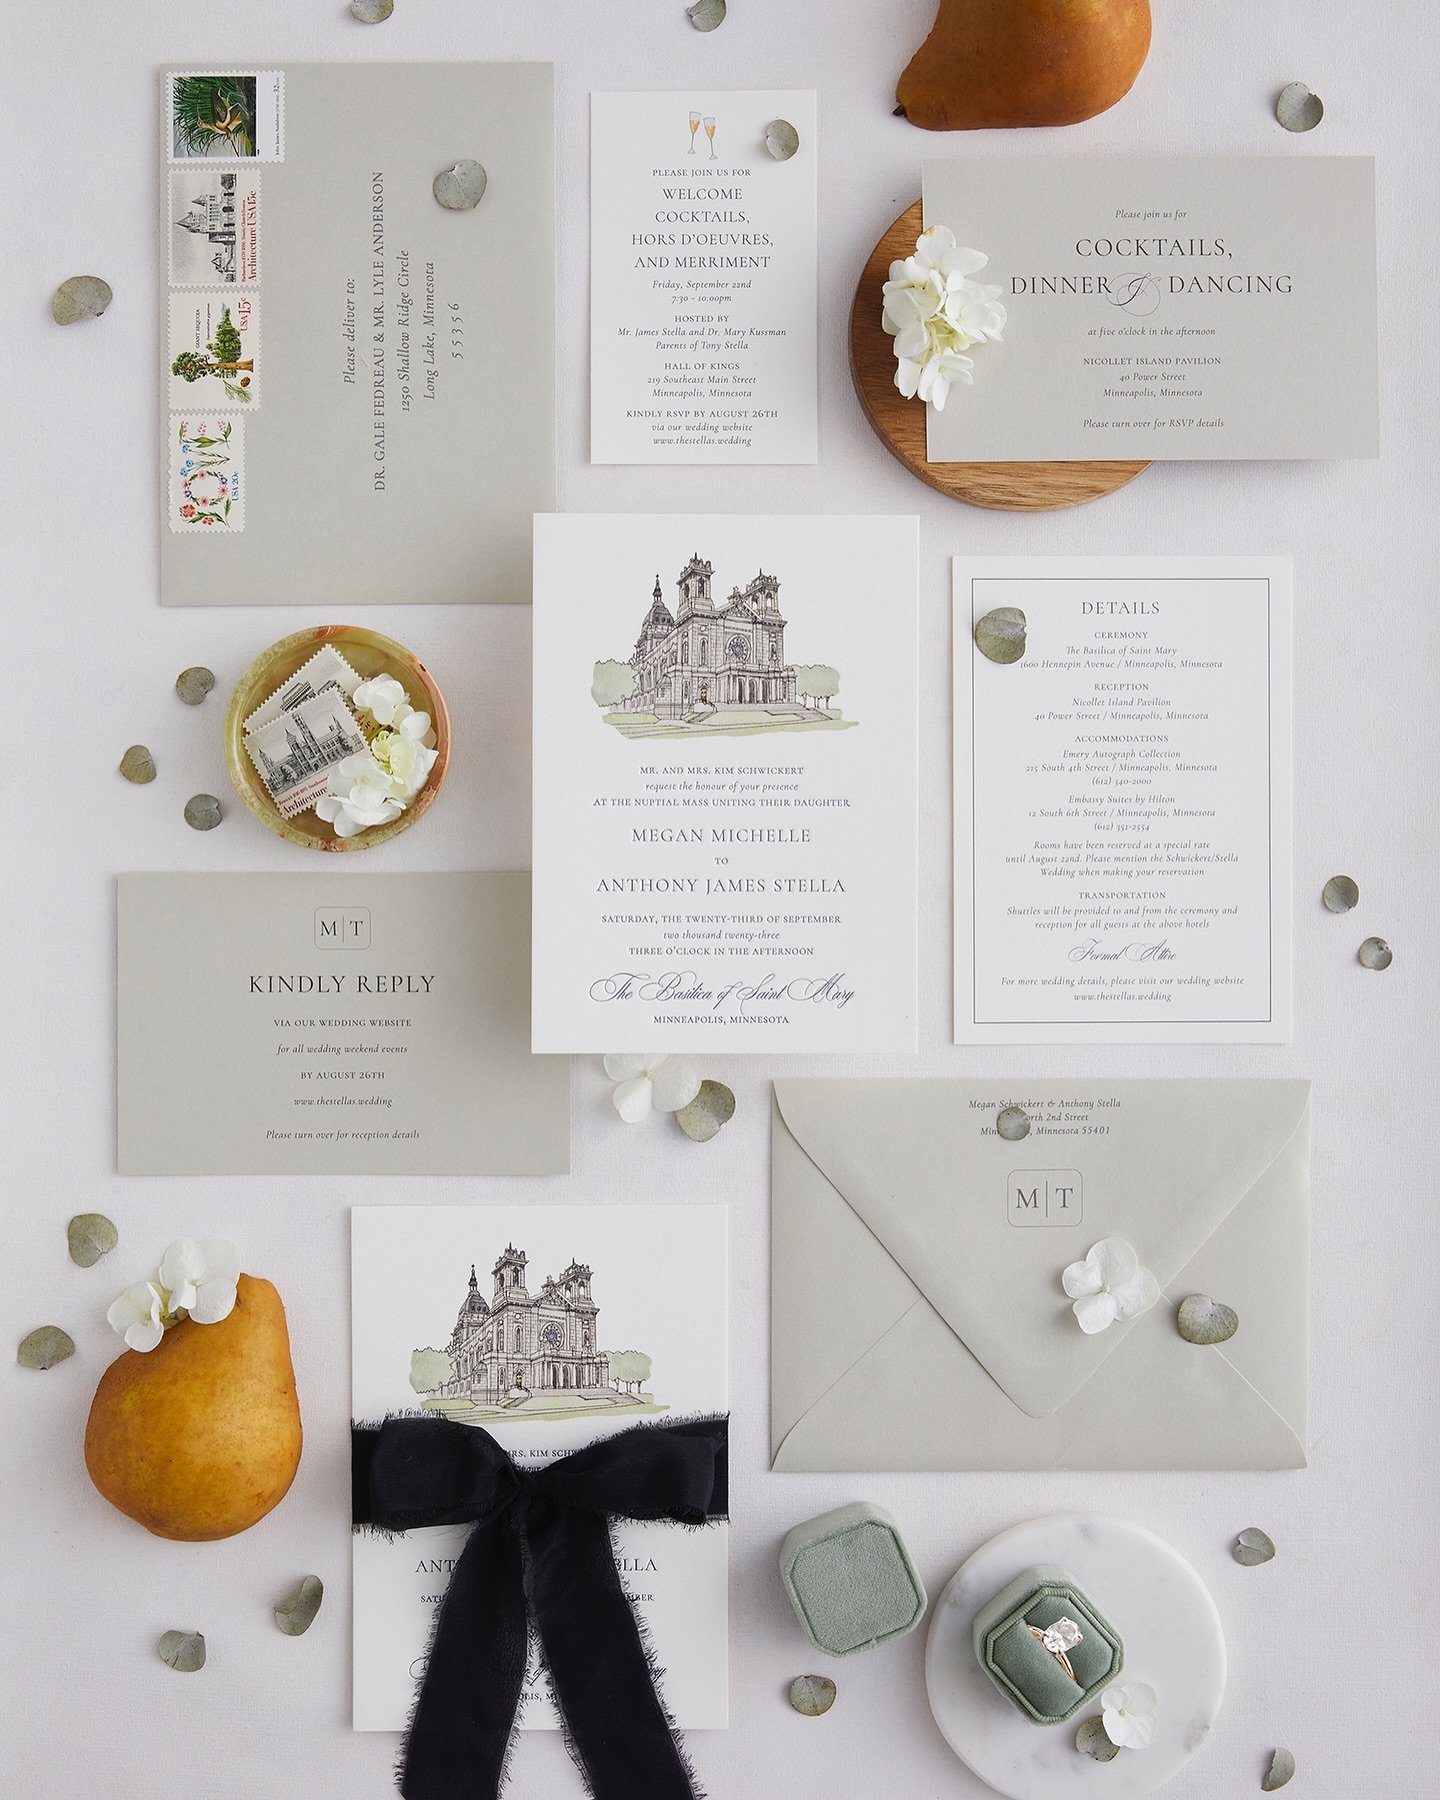 This light sage green and white invitation suite has my heart. Iconic @basilicampls illustrated by @avalambertart takes center stage on the double-thick letterpress and digital printed invitation. Timeless and elegant. 
.
.
.
Photography @clettis 
Il